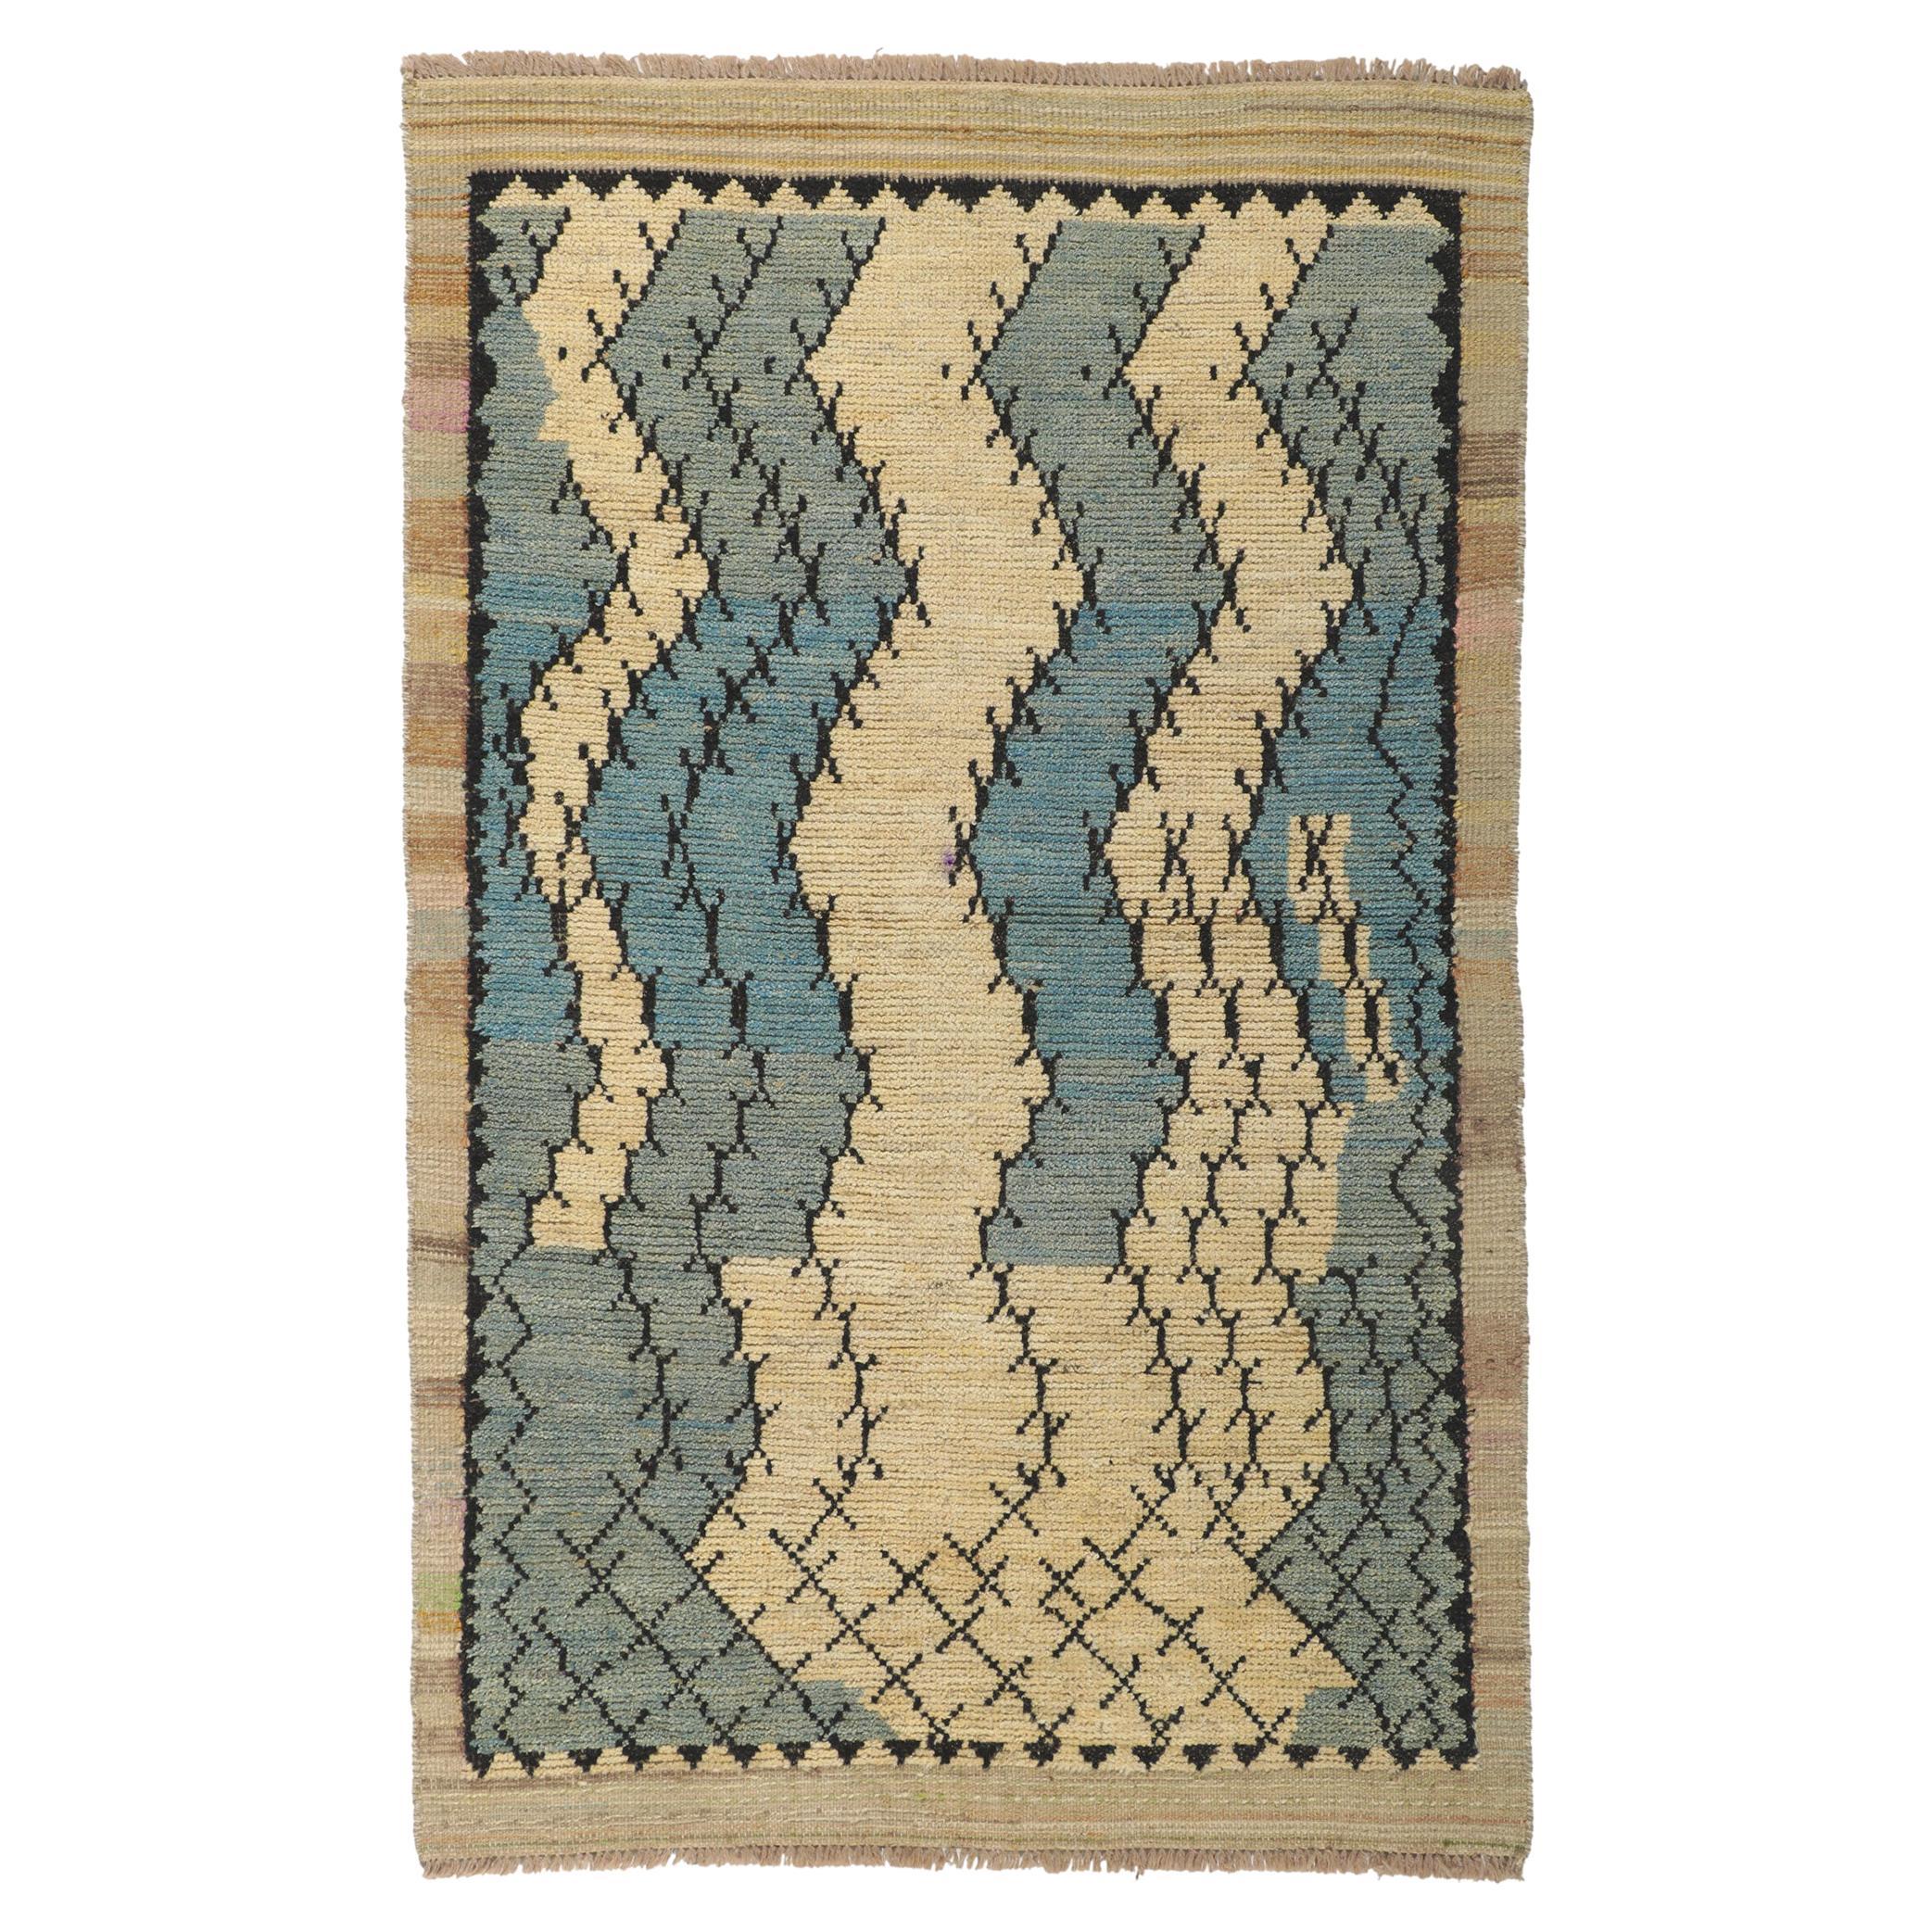 New Contemporary Moroccan Textured Rug